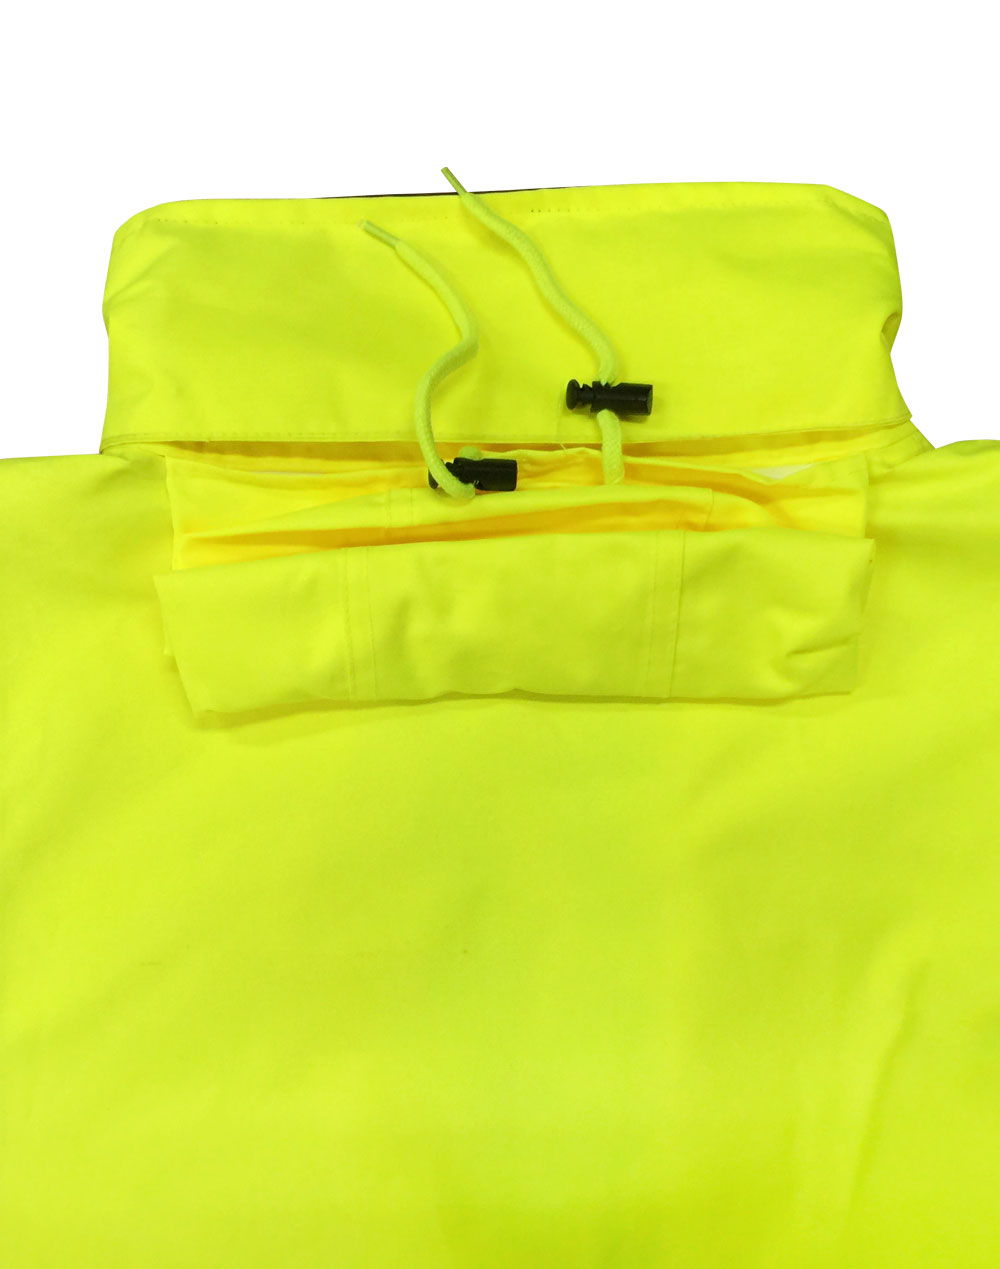 Winning Spirit-Hi-Vis Two Tone Rain Proof Jacket With Quilt Lining-SW28A